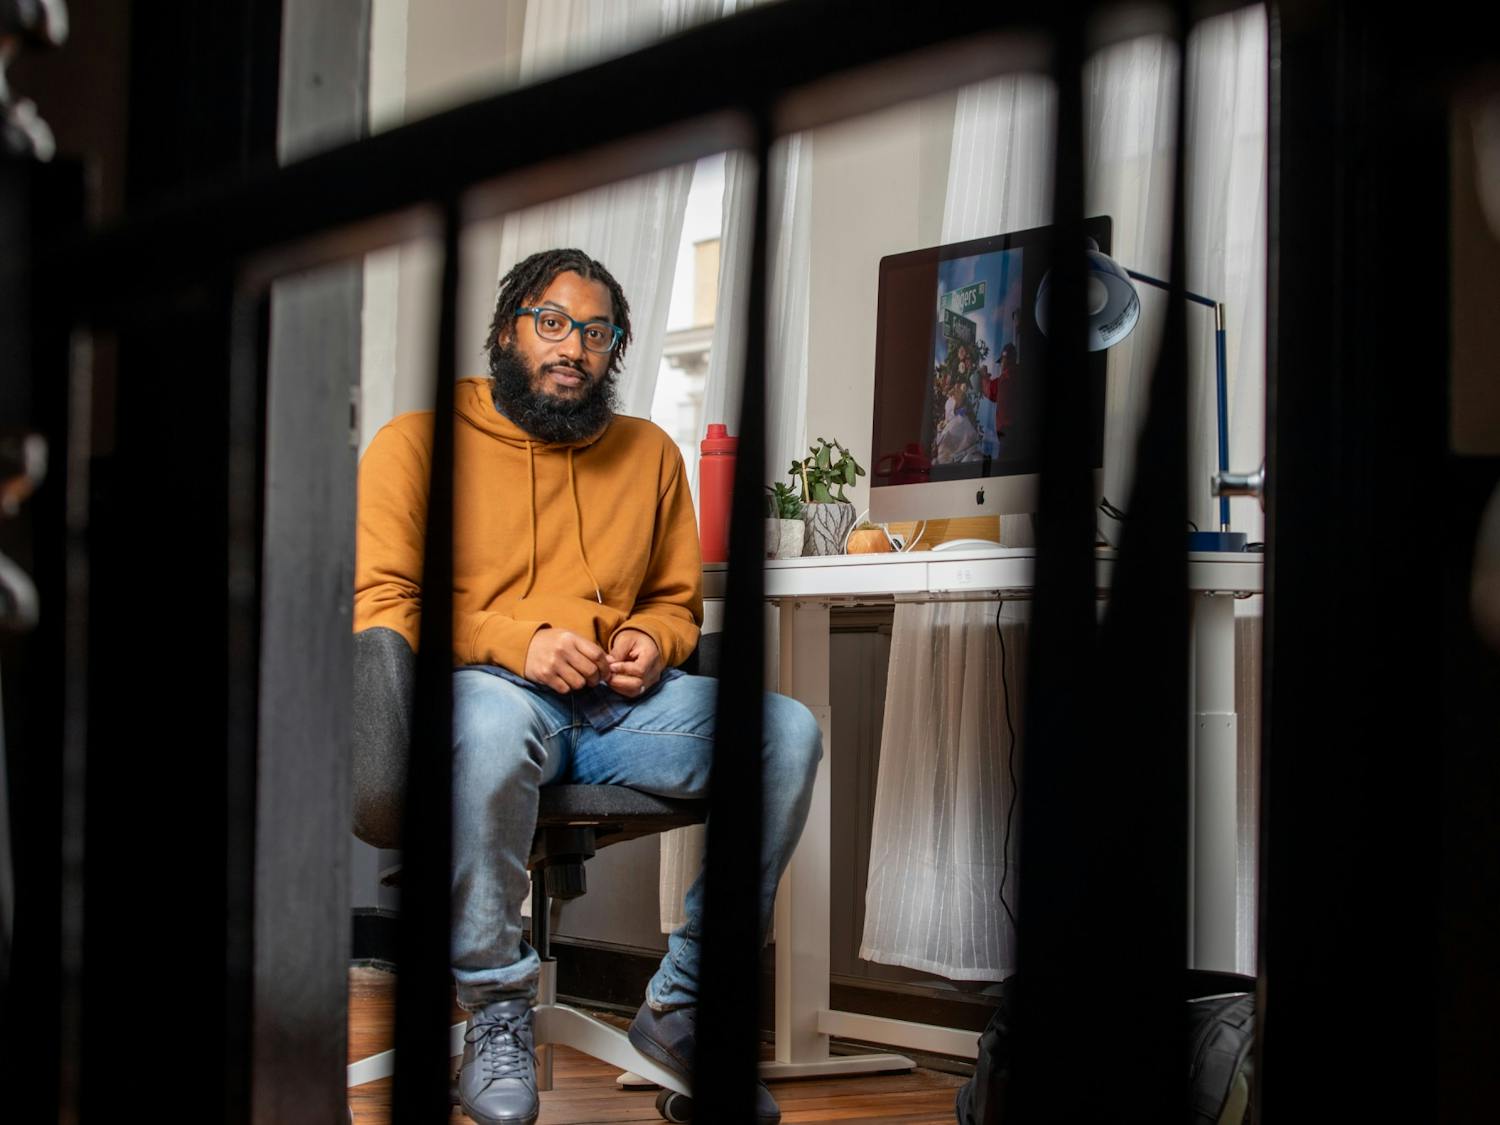 Photographer Cornell Watson, the creator of "Tarred Healing," poses for a portrait in his Durham office on Saturday, Feb. 26, 2022. "Tarred Healing" is a photo story reflecting on Black history in Chapel Hill and at UNC.